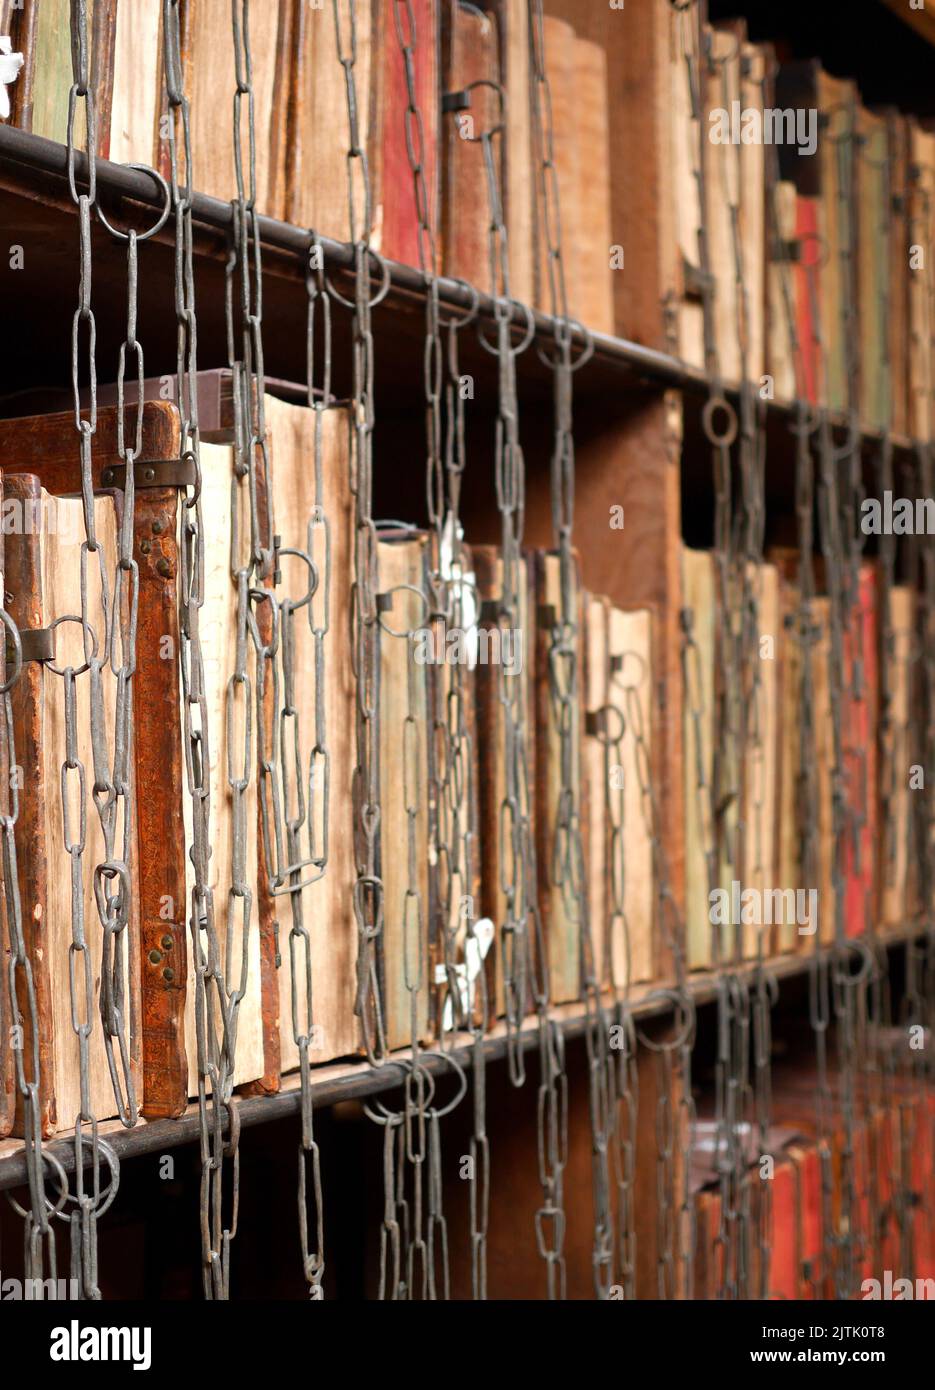 Chained books in the chained library, Hereford Cathedral, Hereford, England Stock Photo